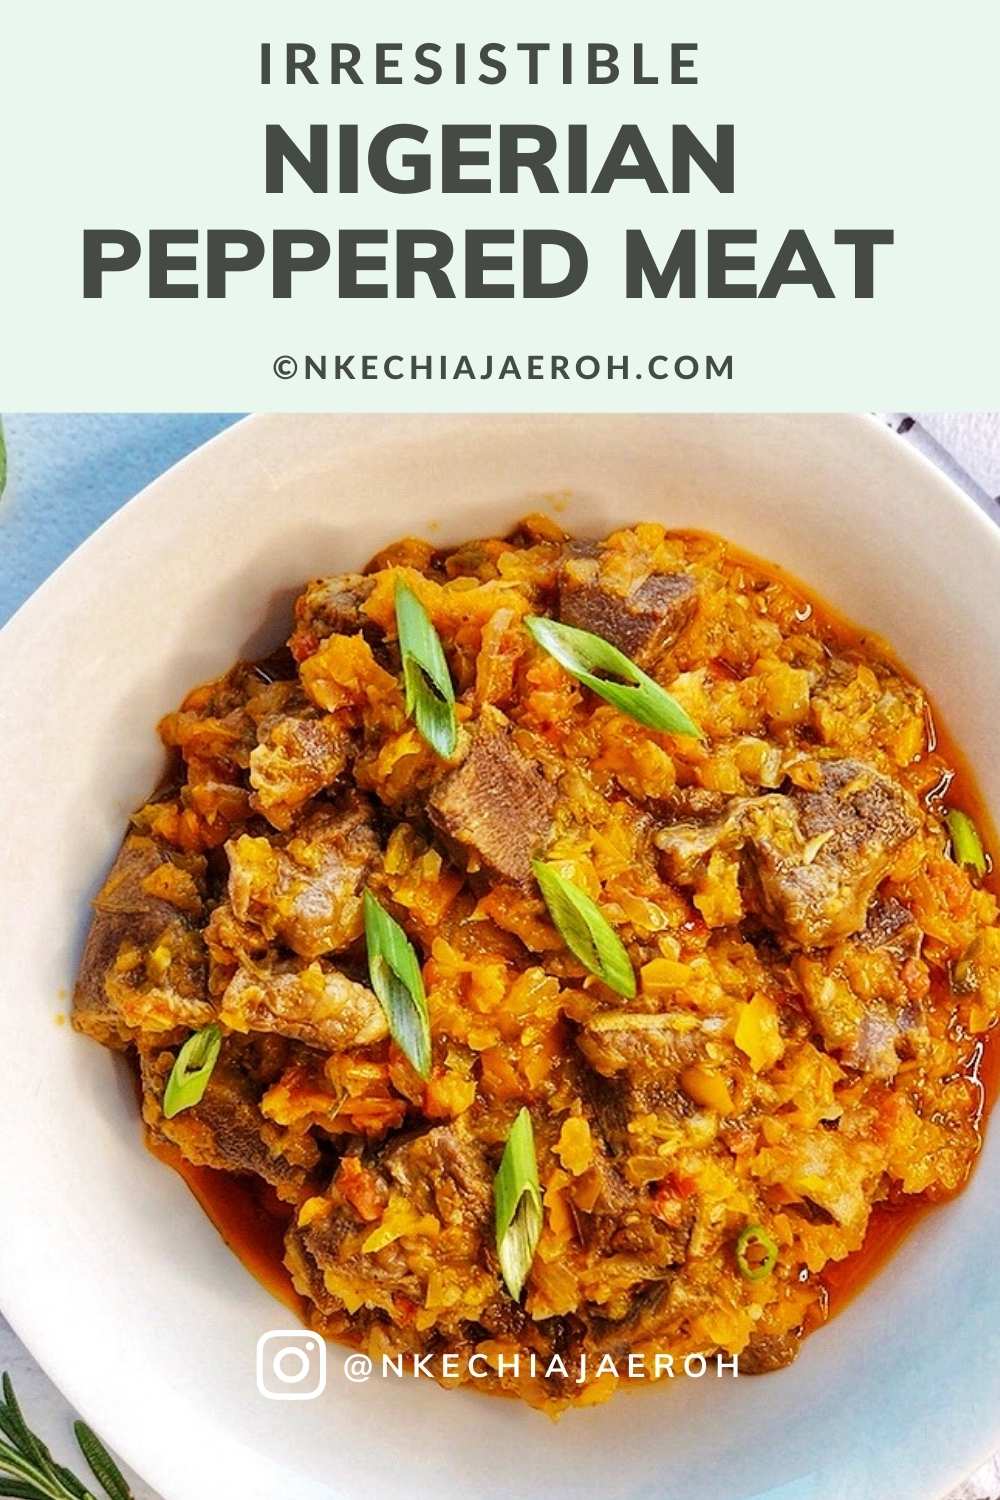 Peppered meat is gluten-free, dairy-free, and keto-friendly. This recipe is packed with high-quality protein. The best thing about making Nigerian peppered meat recipe is that you can use any meat, and today I am using beef tongue, aka cow tongue. Like most Nigerian peppered meat recipes, this dish is flavorful, hot (I mean spicy hot), mouth-watering, lip-smacking, and irresistibly delicious. This recipe is a must-try!